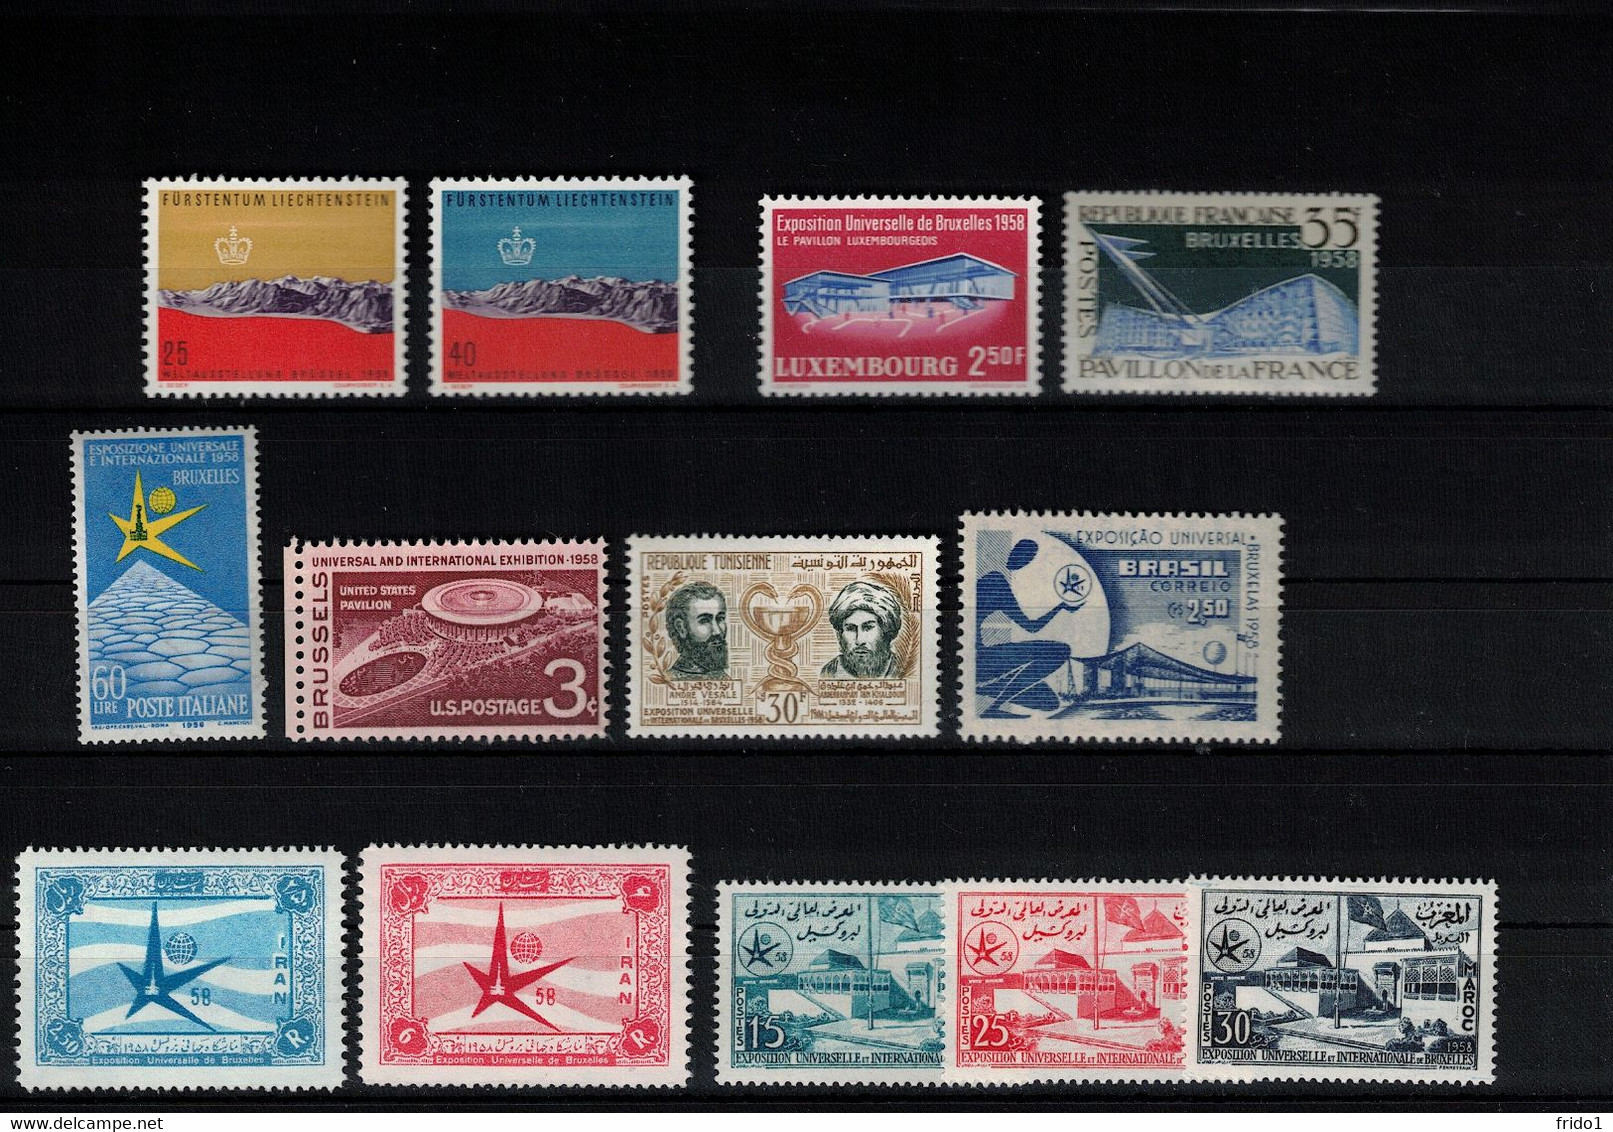 1958 Universal And International Exhibition Brussels / Bruxelles Selection Of Sets From Different Count. Postfrisch/ MNH - 1958 – Brussel (België)